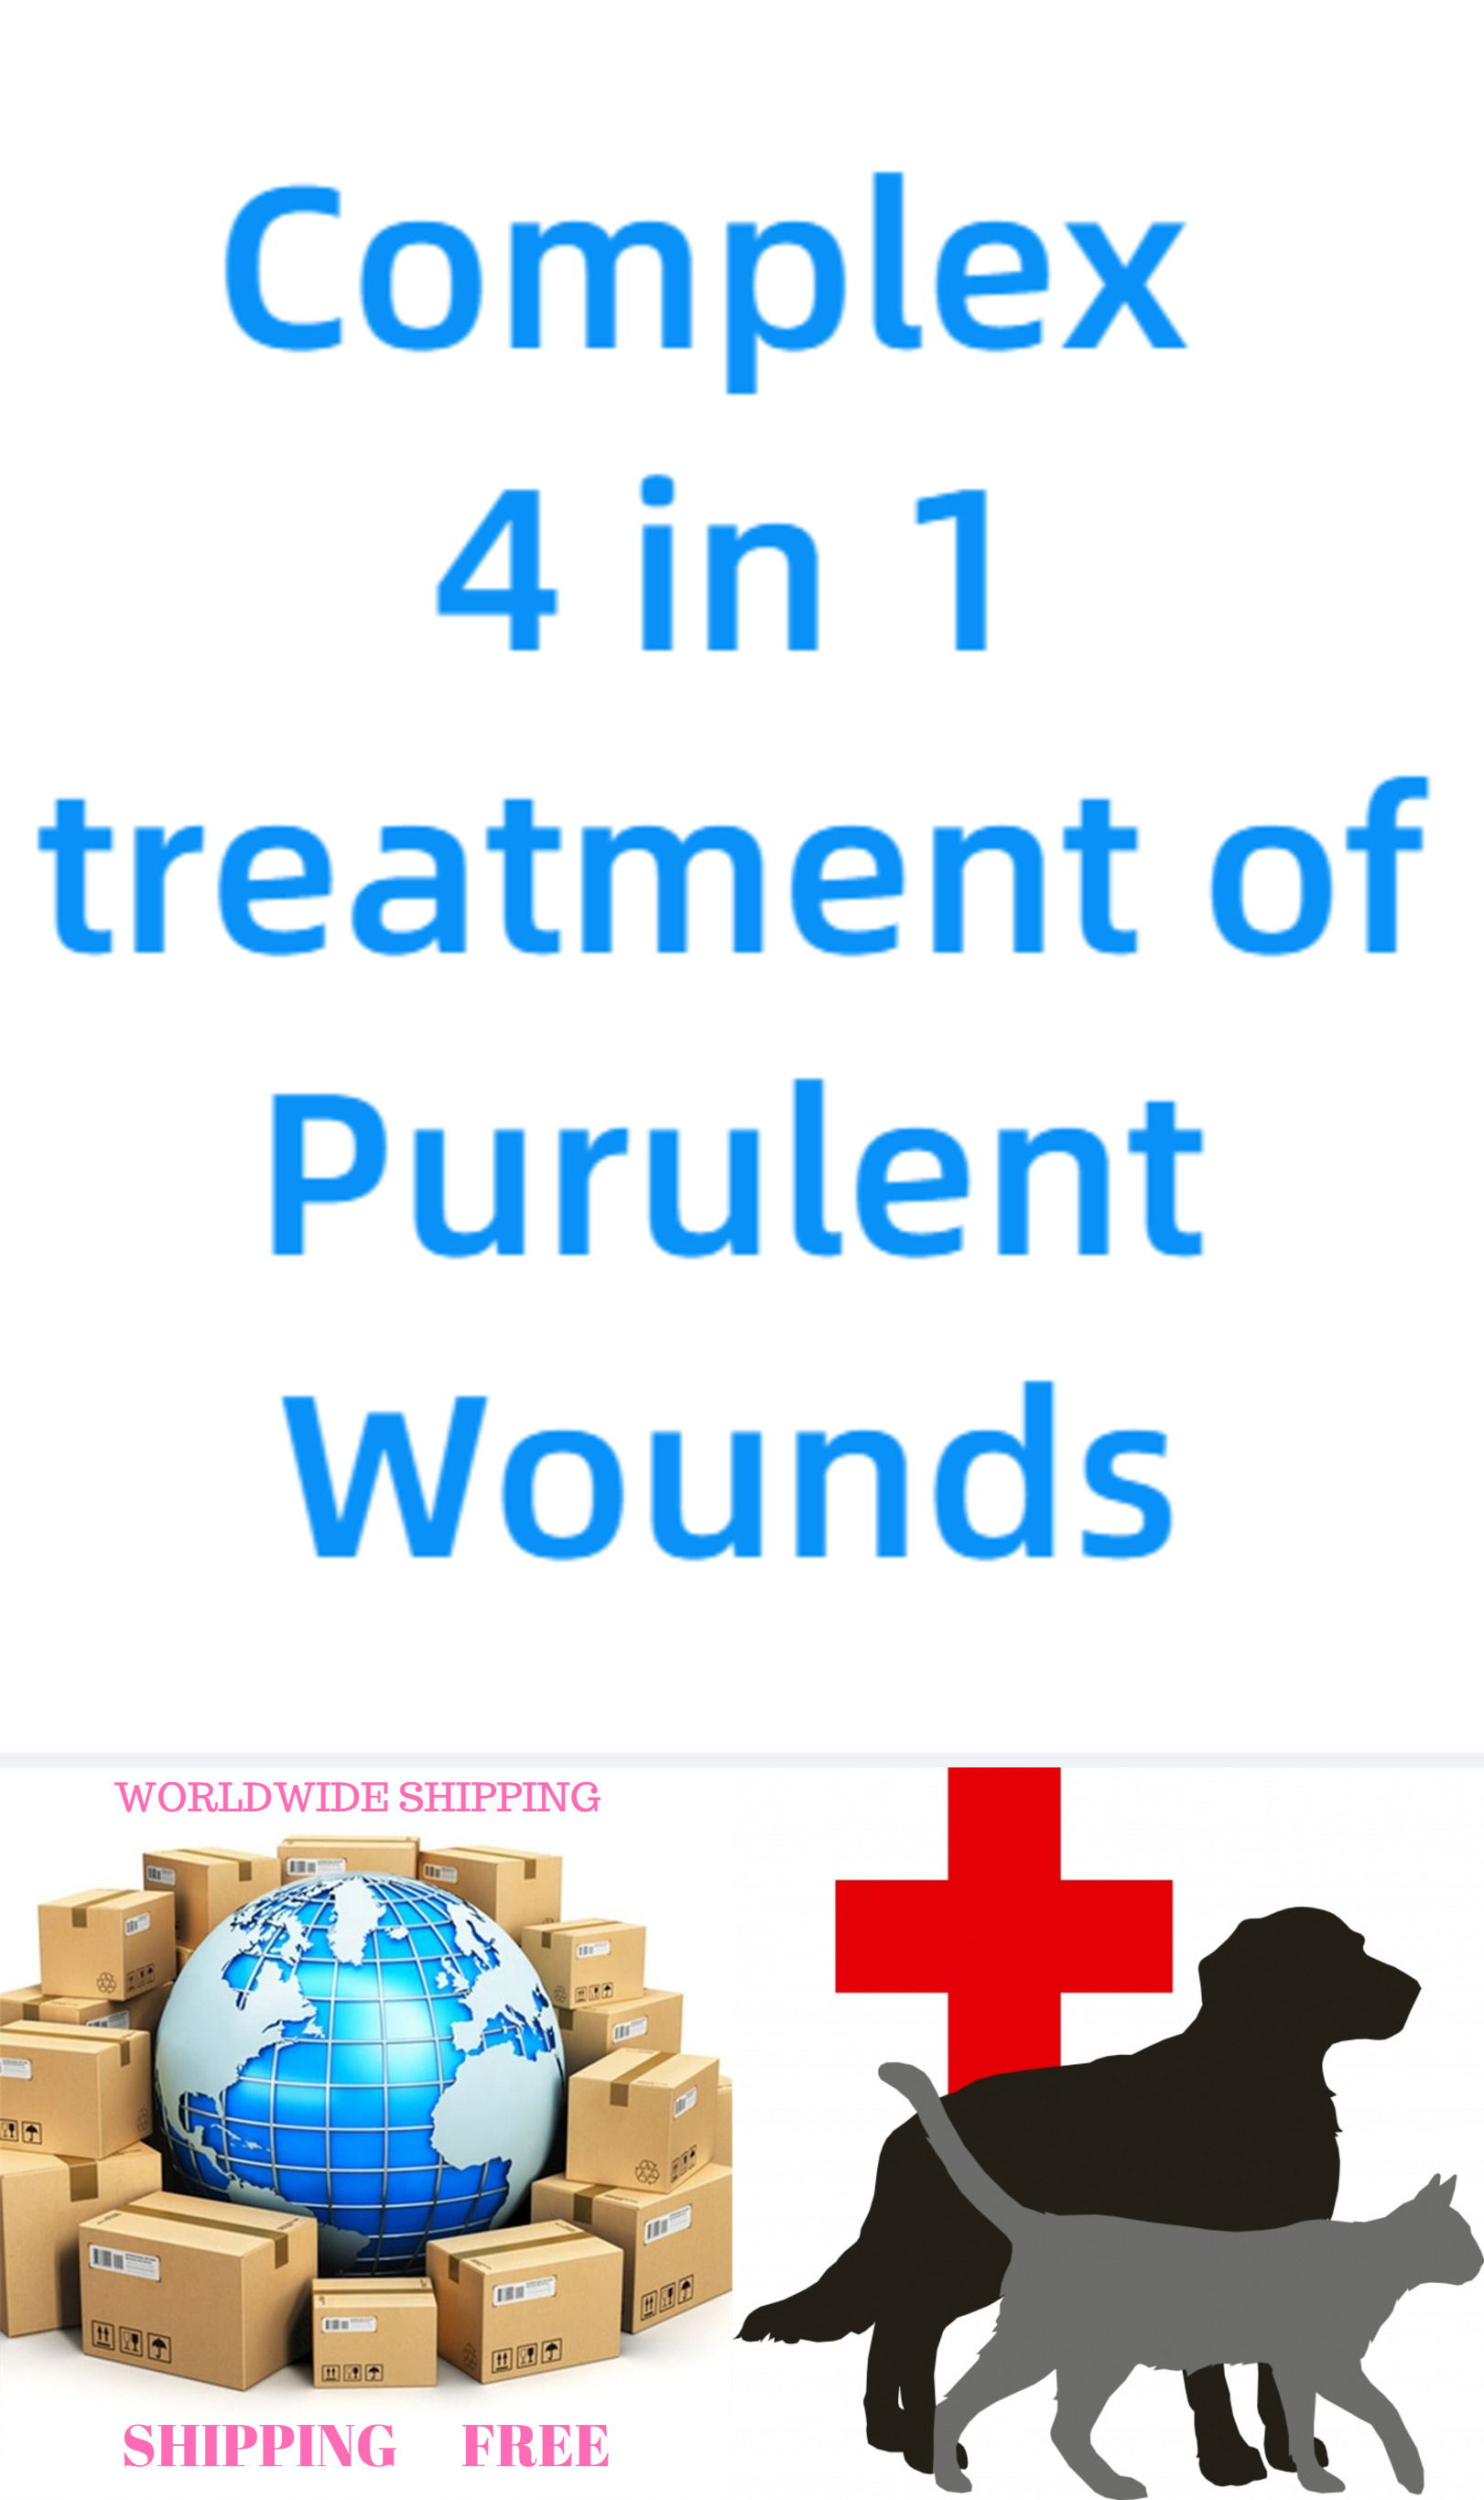 Complex ( 4in1 for Healing Pus Wounds ) dogs, cats, cattle, sheep, goats dermatitis patients, infected and postoperative wounds, ulcers, fistulas, wet eczema, dermatitis, tendovaginitis, phlegmons, lymphadenitis, wounds that are difficult to heal.